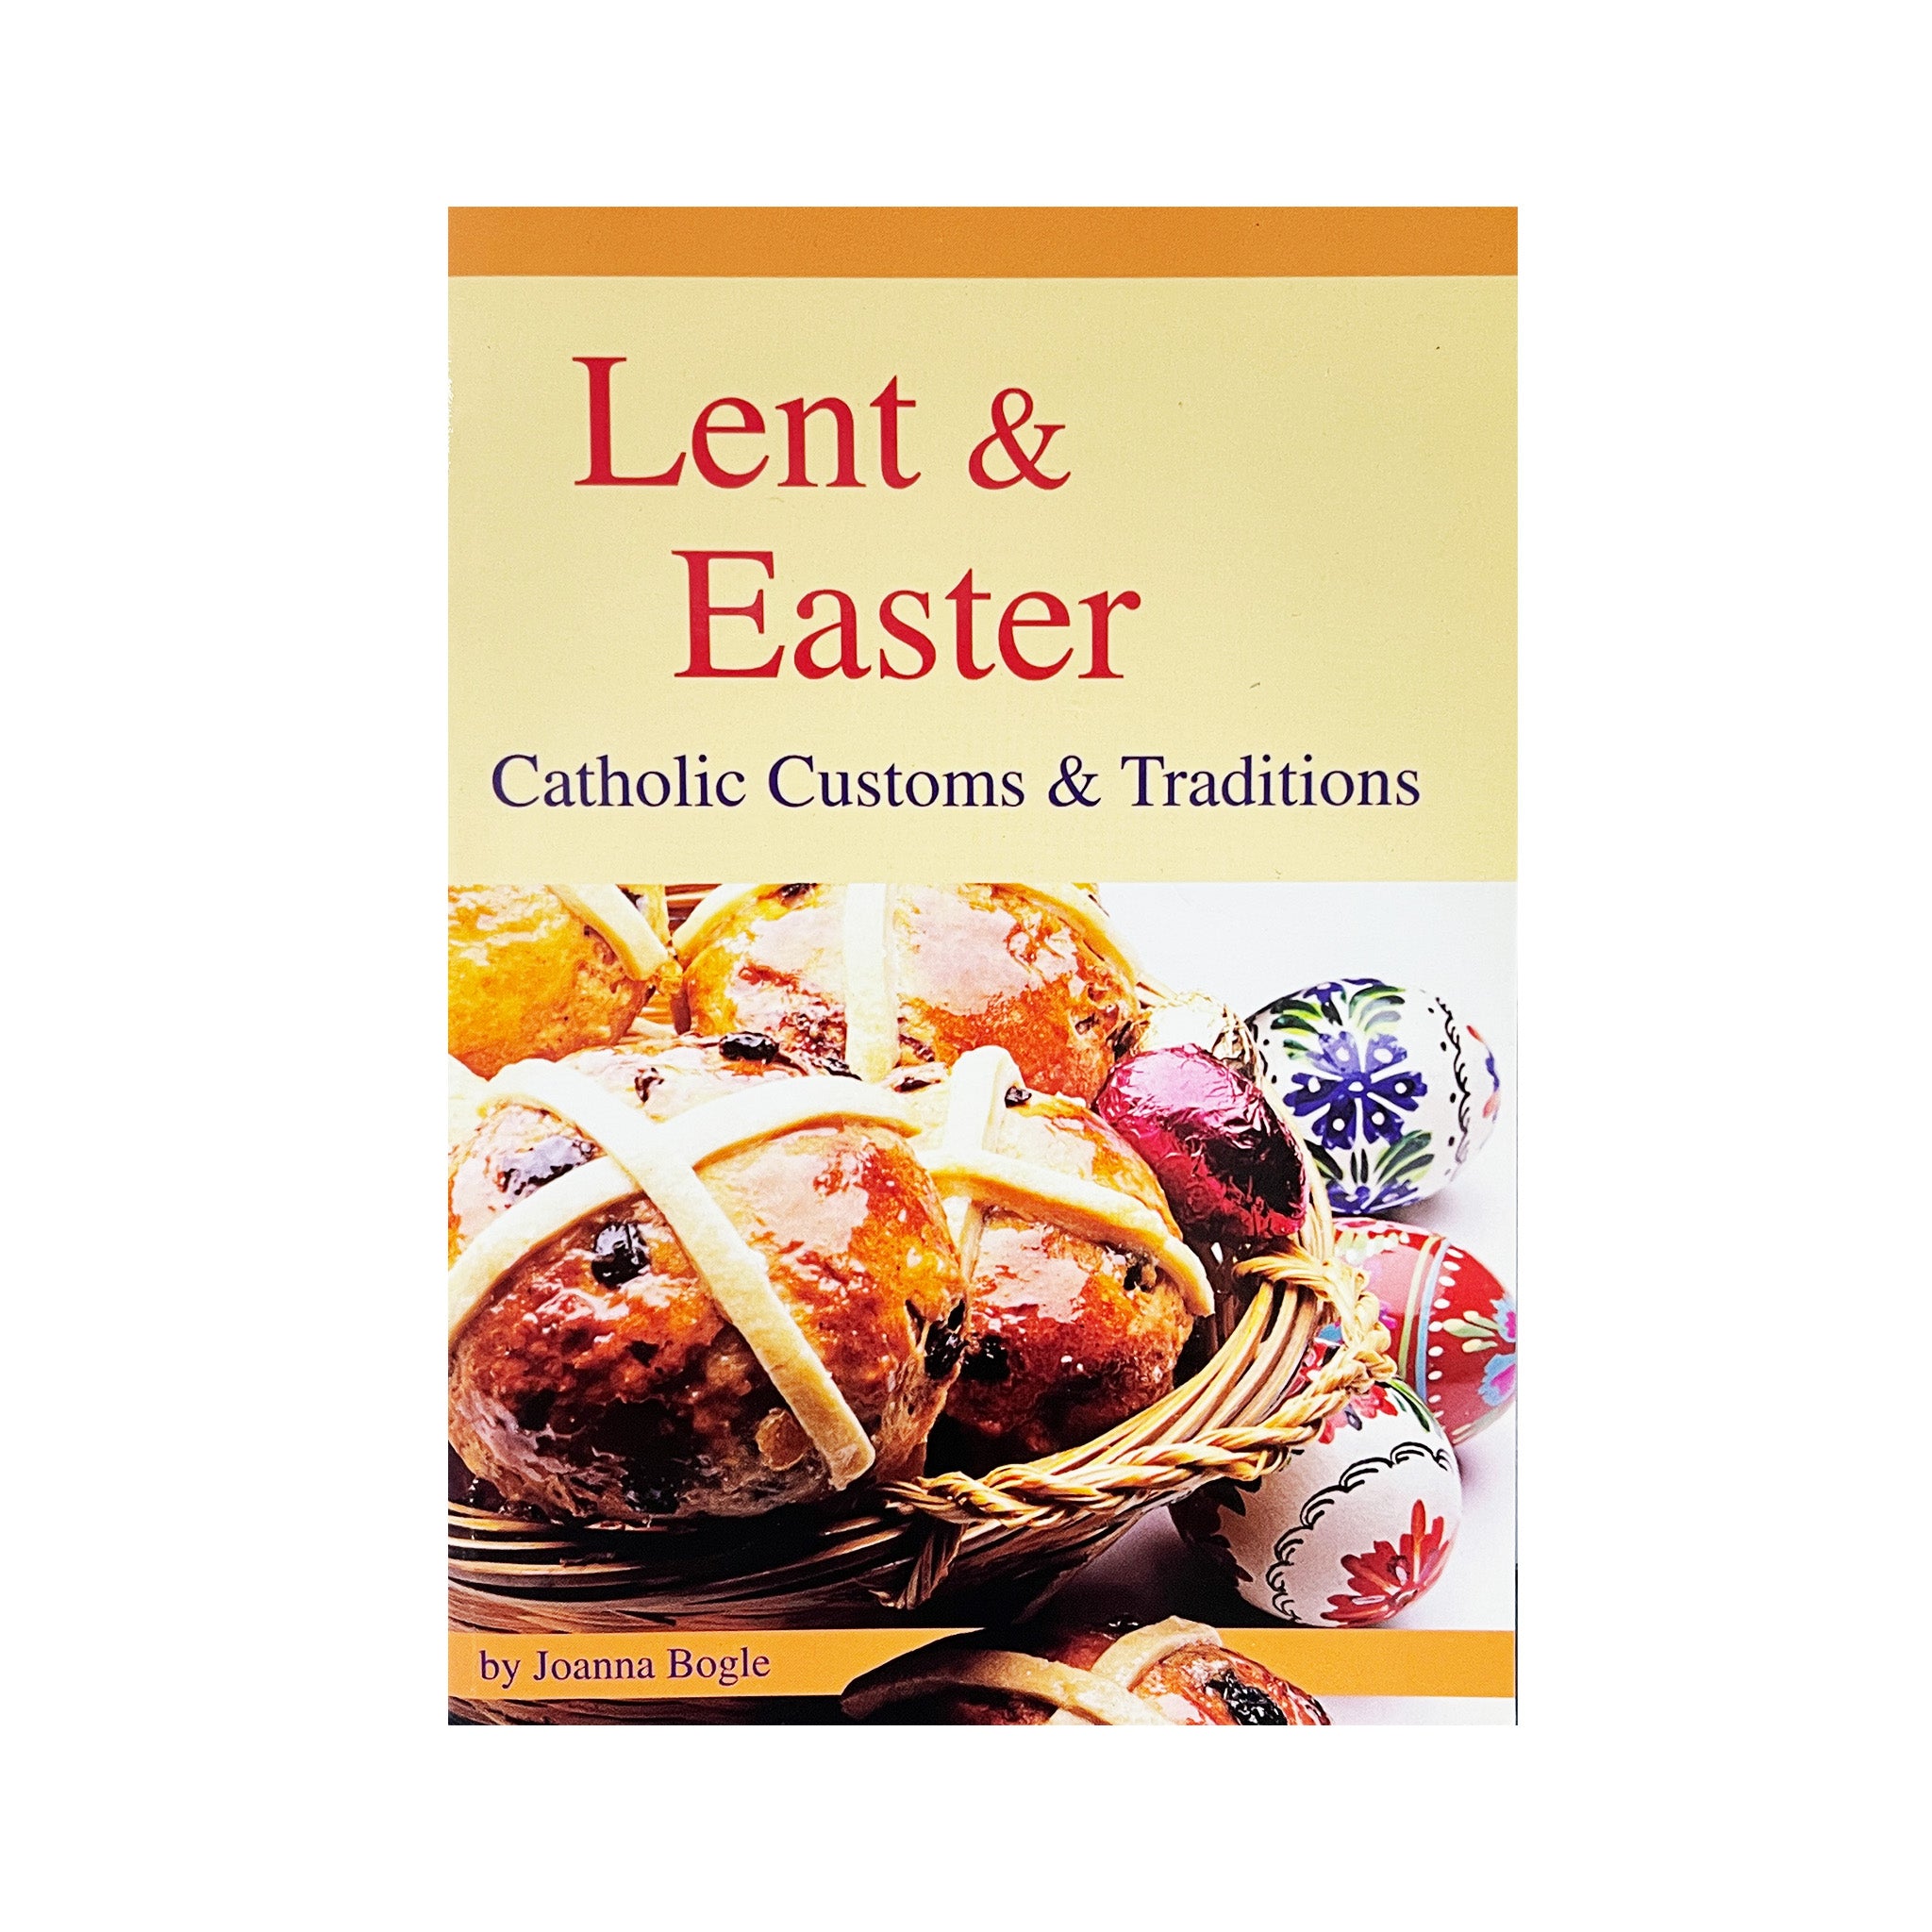 LENT & EASTER - CATHOLIC CUSTOMS & TRADITIONS